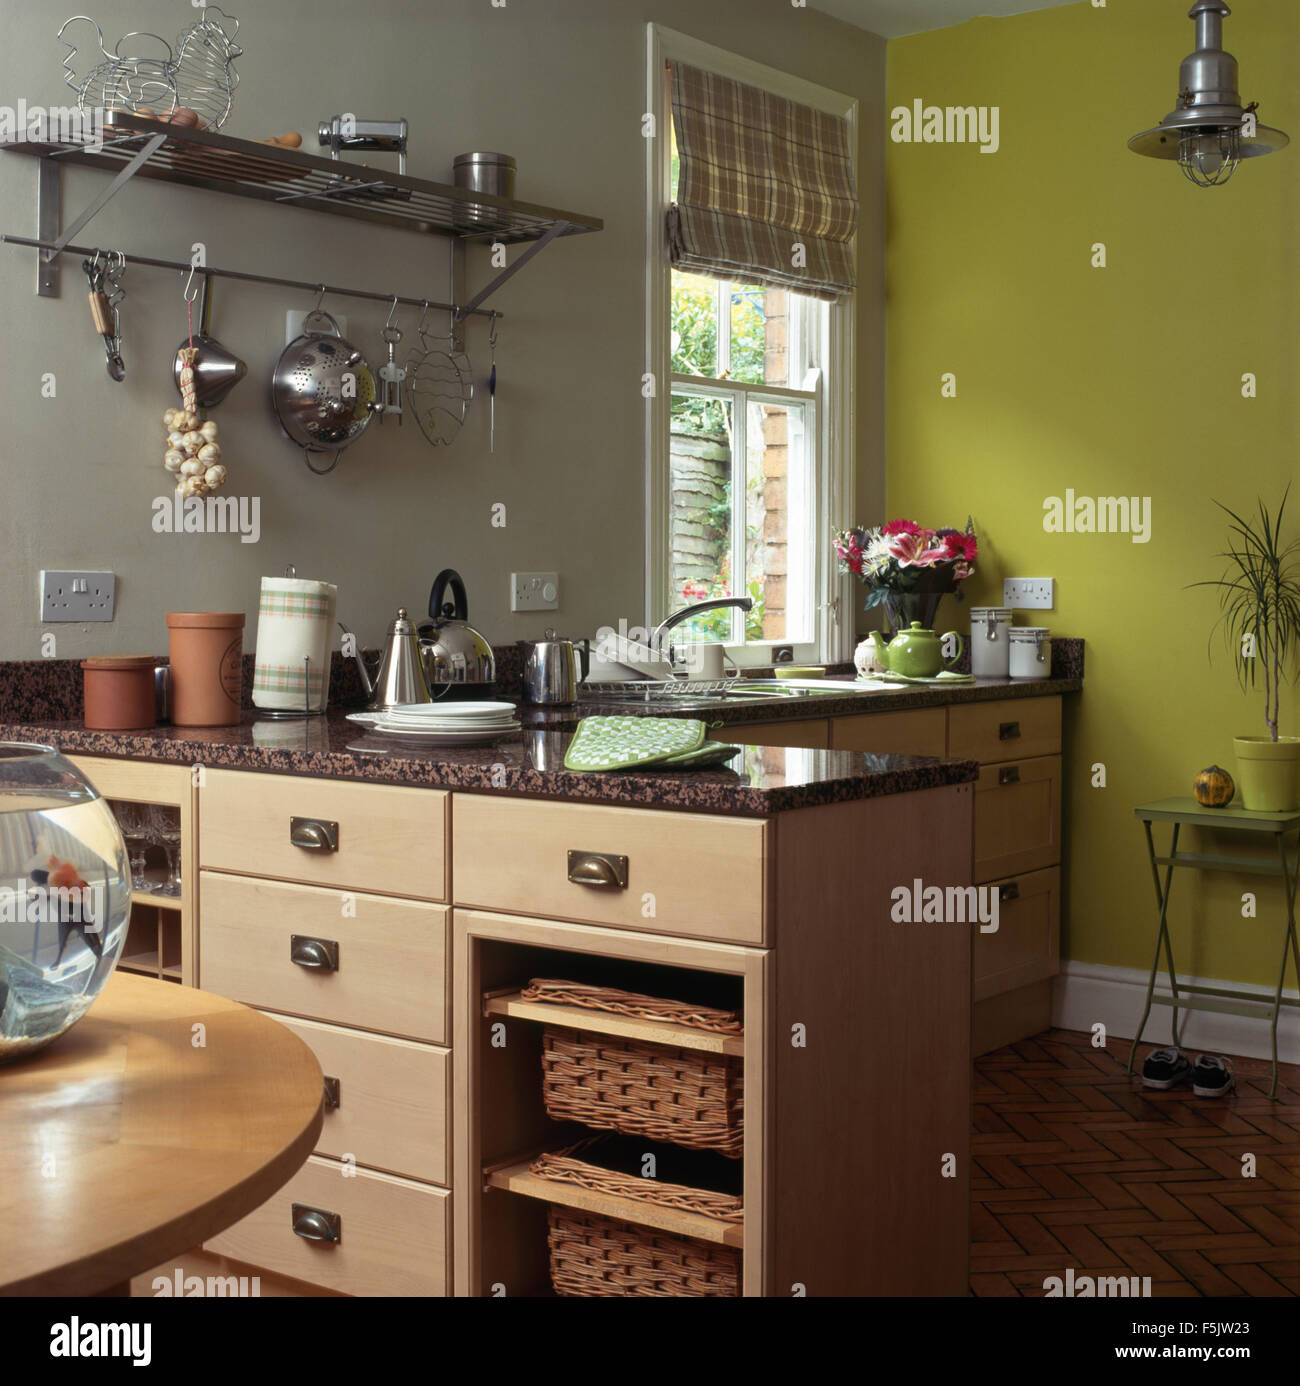 Storage baskets on shelves in peninsular unit in a lime green and gray kitchen Stock Photo